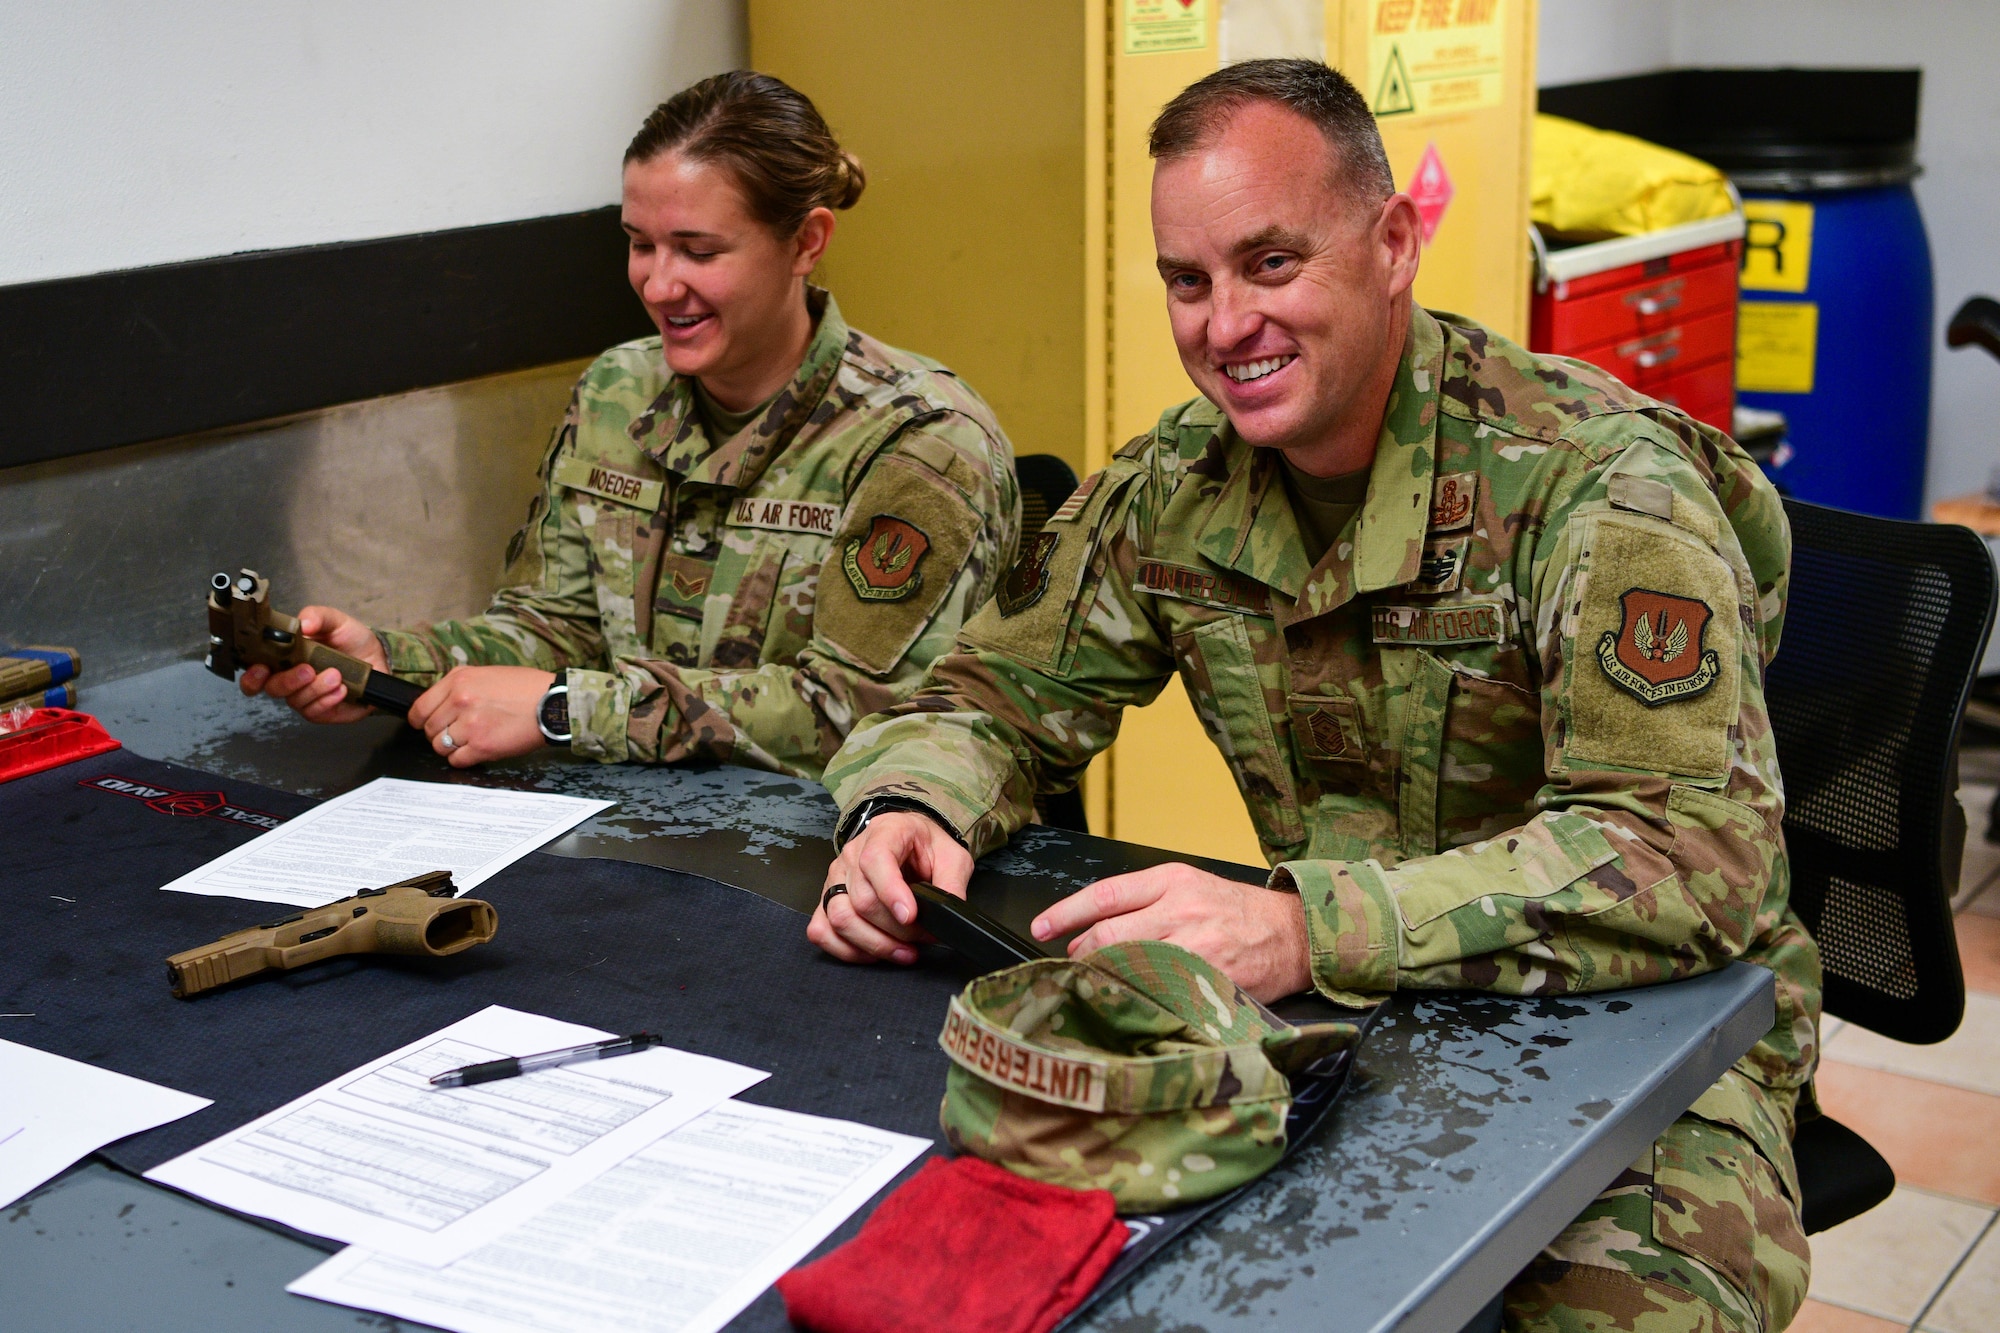 U.S. Air Force Chief Master Sgt. Jeremy Unterseher, 31st Fighter Wing command chief, right, and U.S. Air Force Senior Airman Brooke Moeder, left, 31st FW public affairs specialist, attend a familiarization briefing during the 2022 Excellence in Competition Pistol match at Aviano Air Base, Italy, May 17, 2022. Combat arms instructors briefed participants on gun safety fundamentals and how to handle an M18 Handgun for the competition held in honor of Police Week. Police Week has been held annually since 1962, after President Kennedy designated the week of May 15 in remembrance of officers who have died in the line of duty. (U.S. Air Force photo by Airman 1st Class Calopedis)